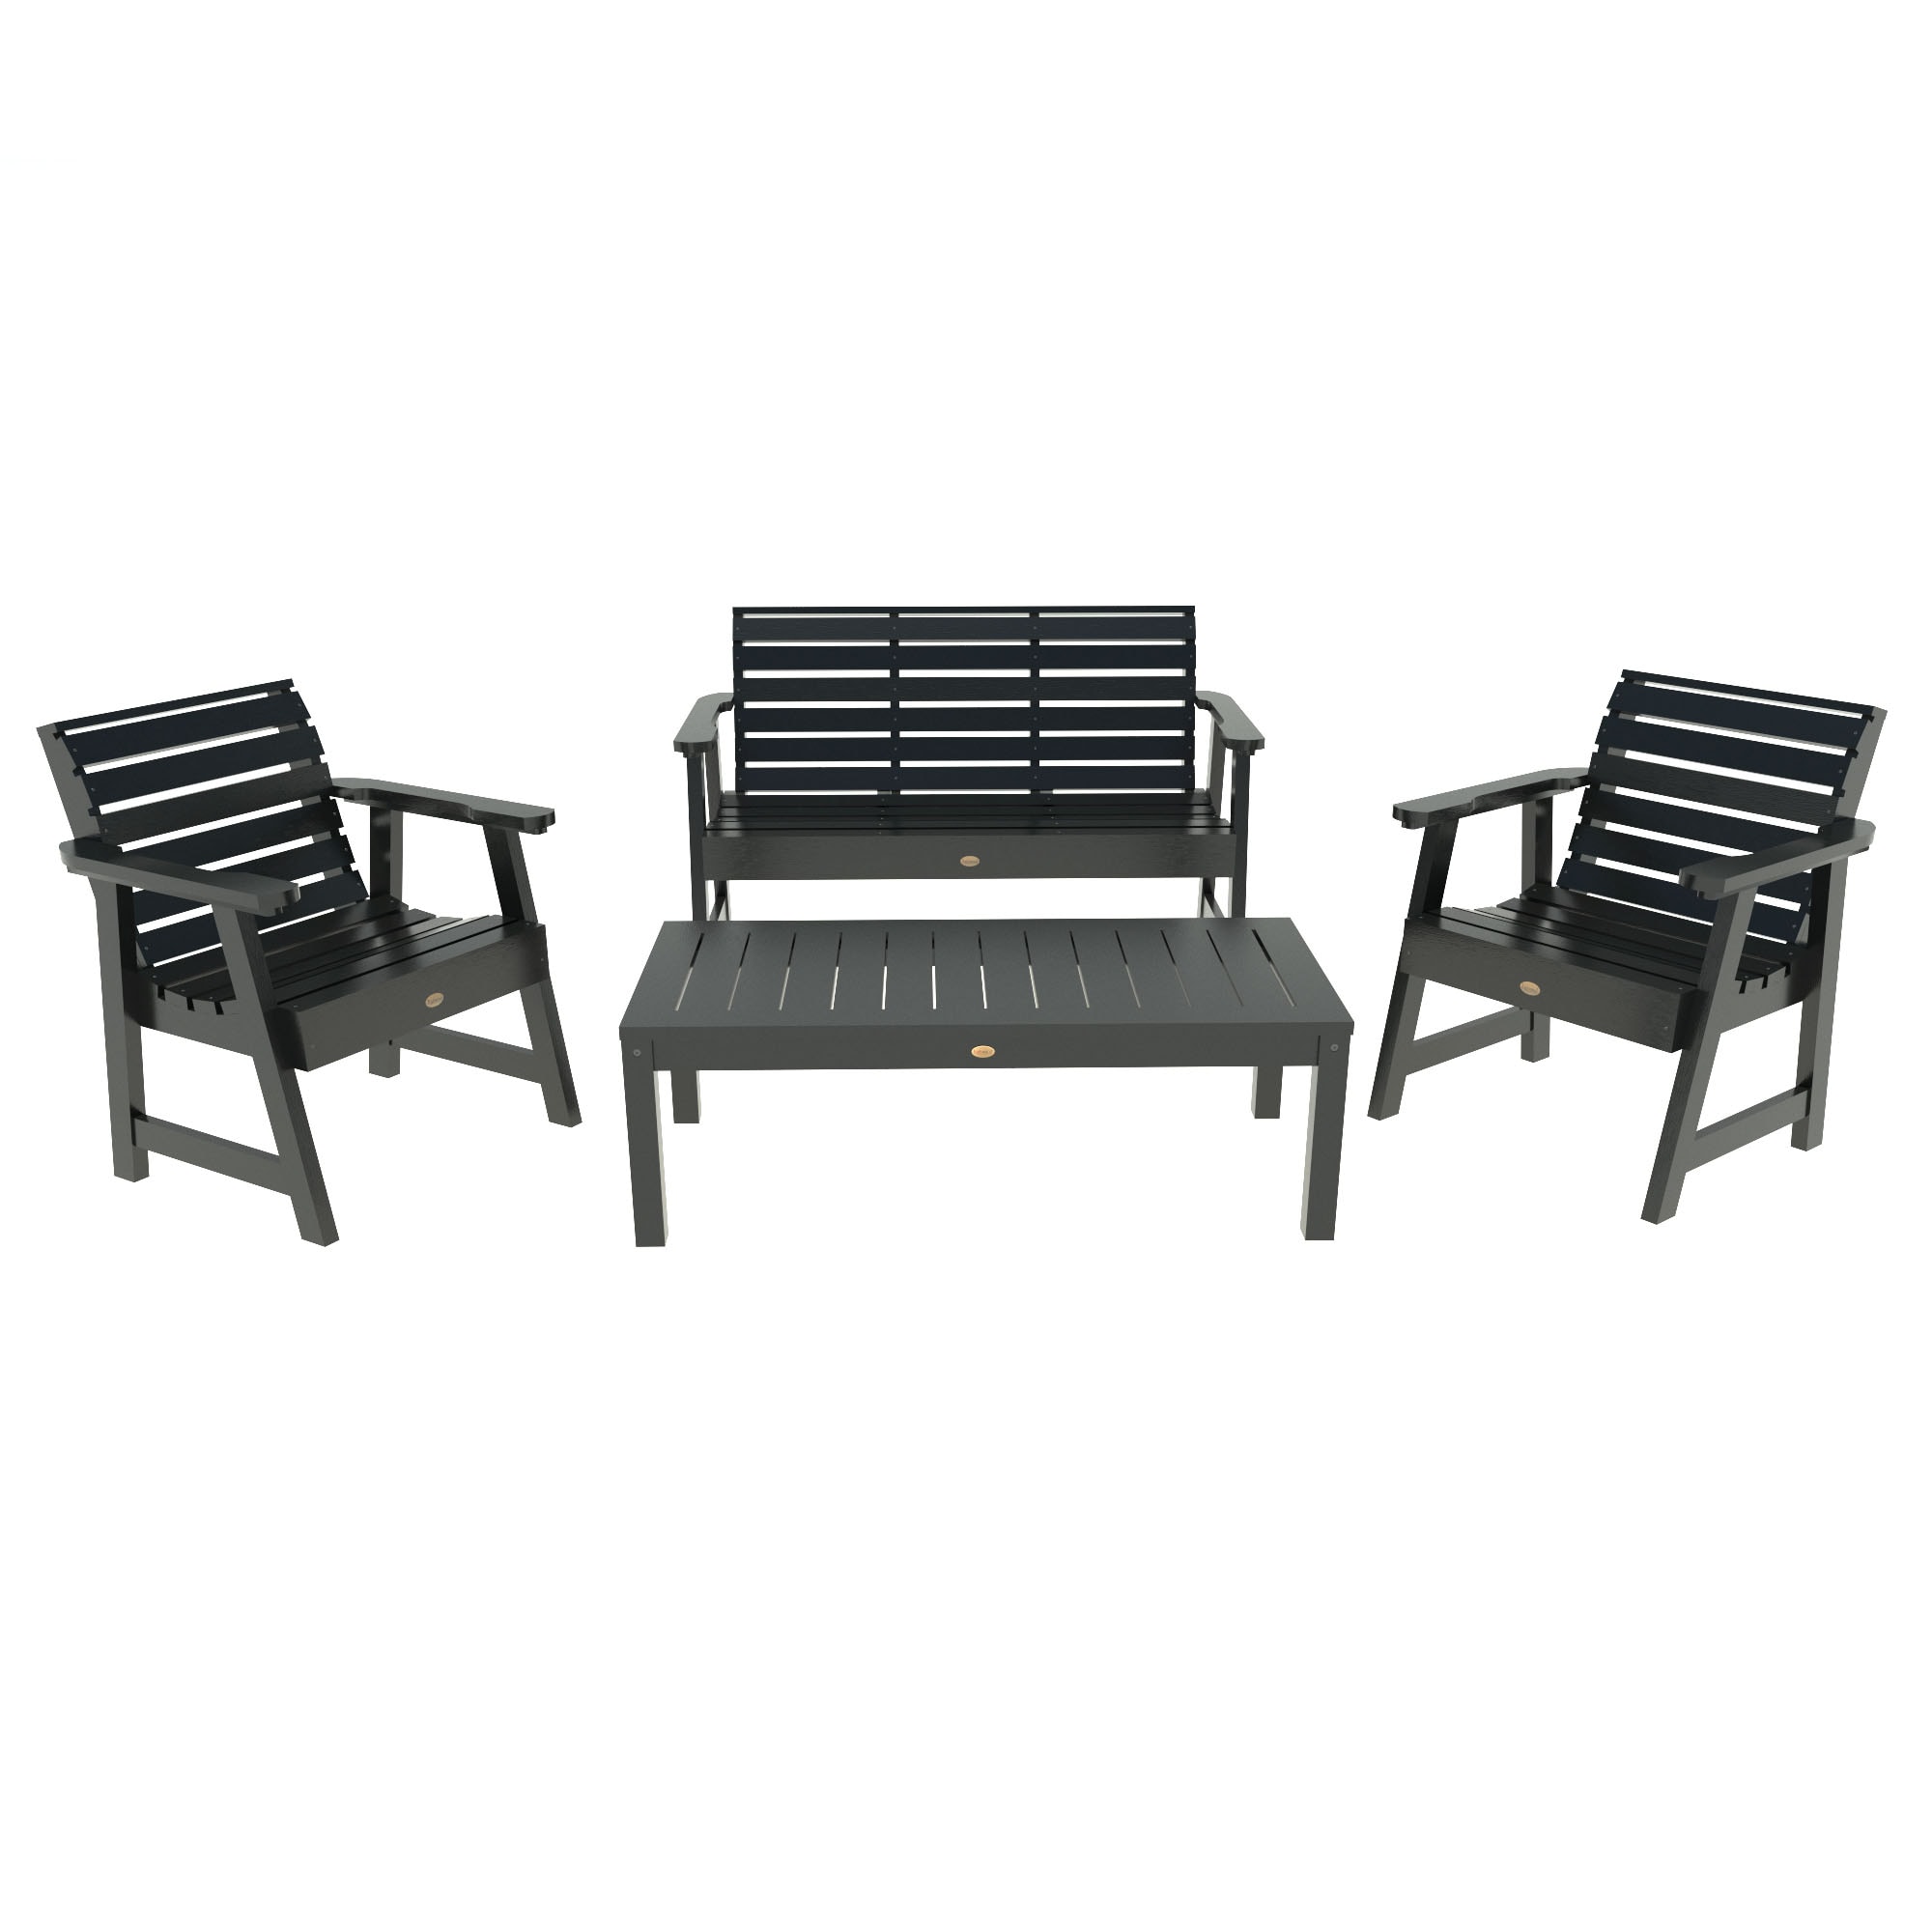 Kindercentrum verhaal lezing highwood The Weatherly 4-Piece Patio Conversation Set in the Patio  Conversation Sets department at Lowes.com